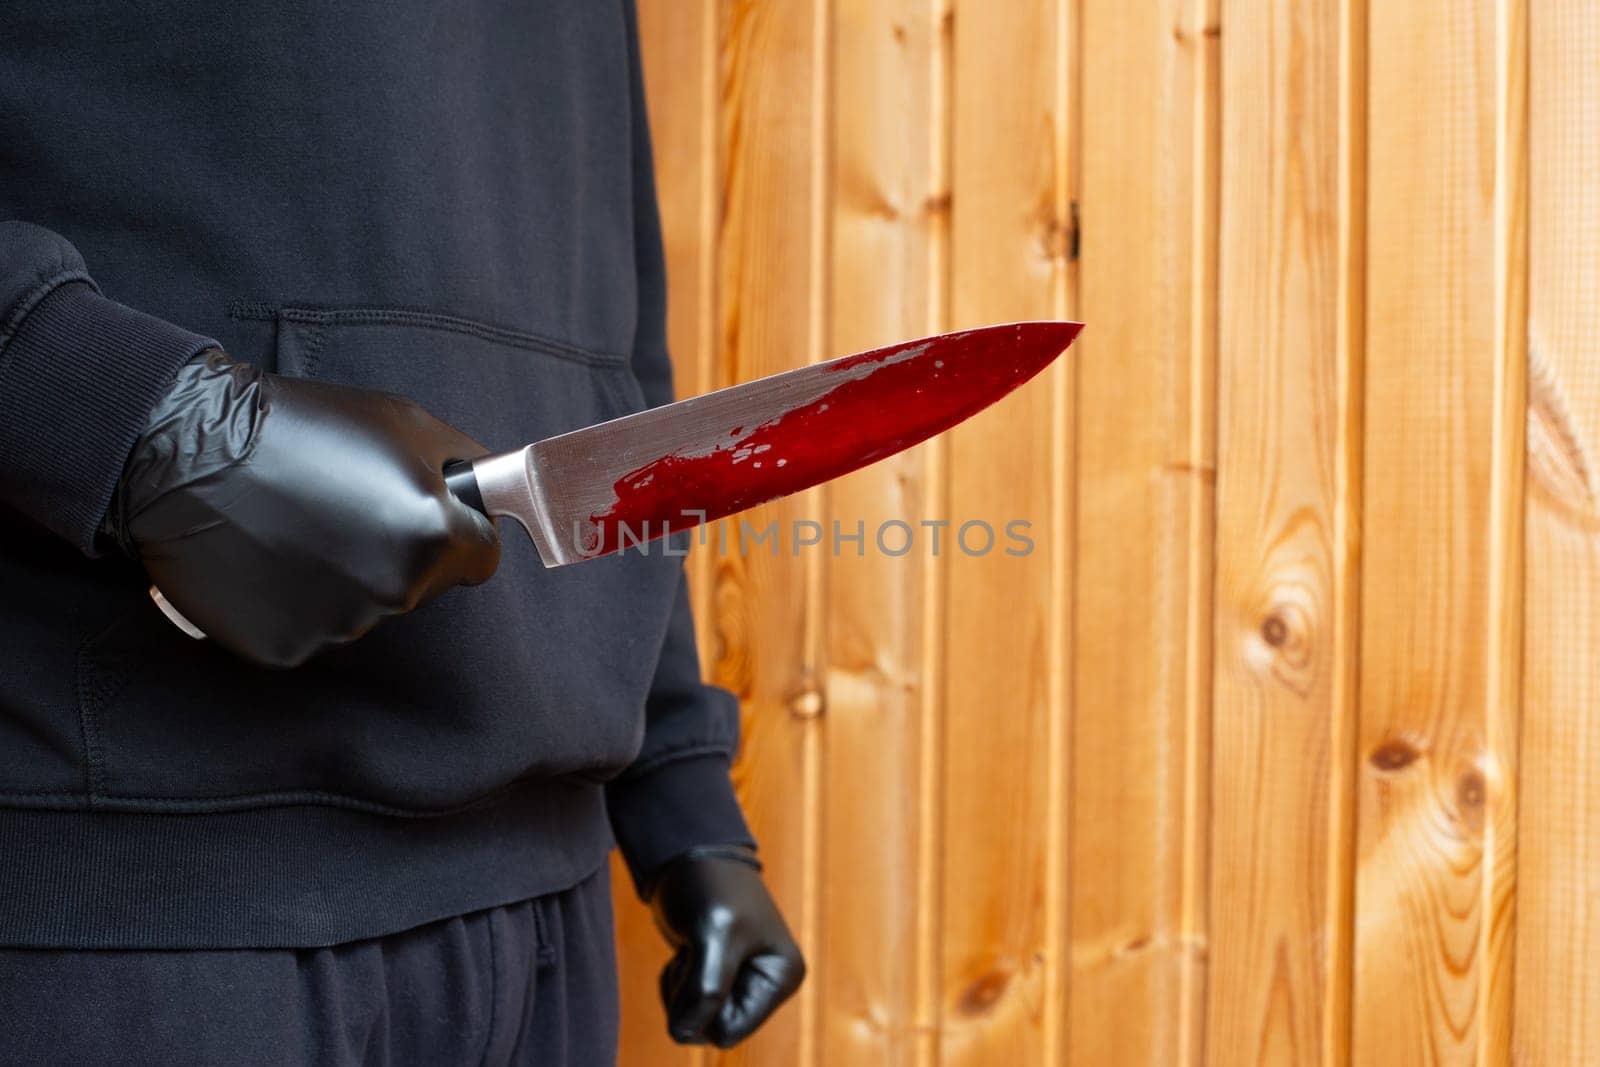 Criminal holds bloody knife in his hand, killer in black gloves with knife with dripping blood